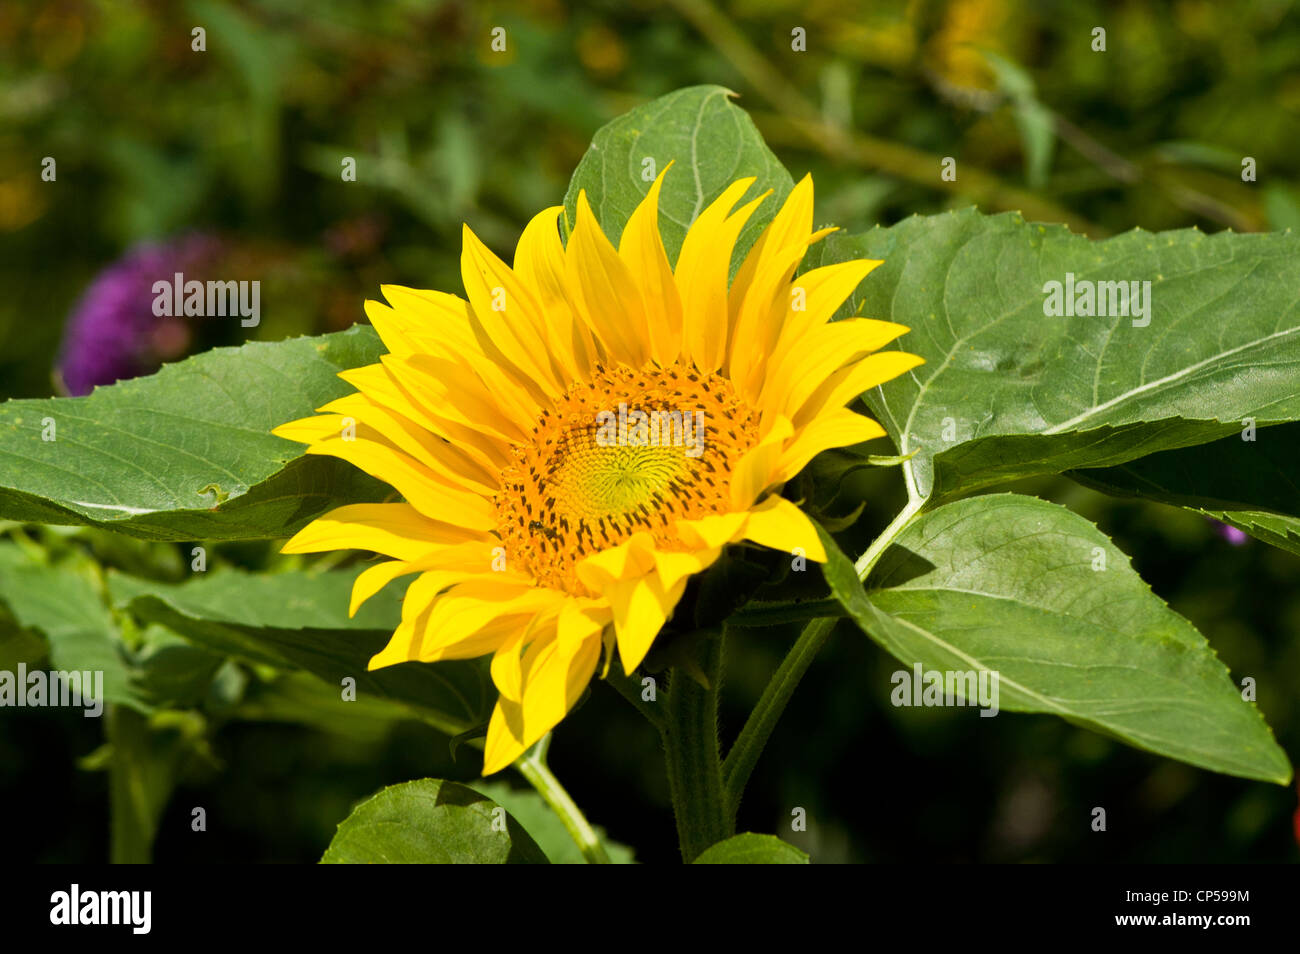 Yellow sunflower with green foliage Stock Photo